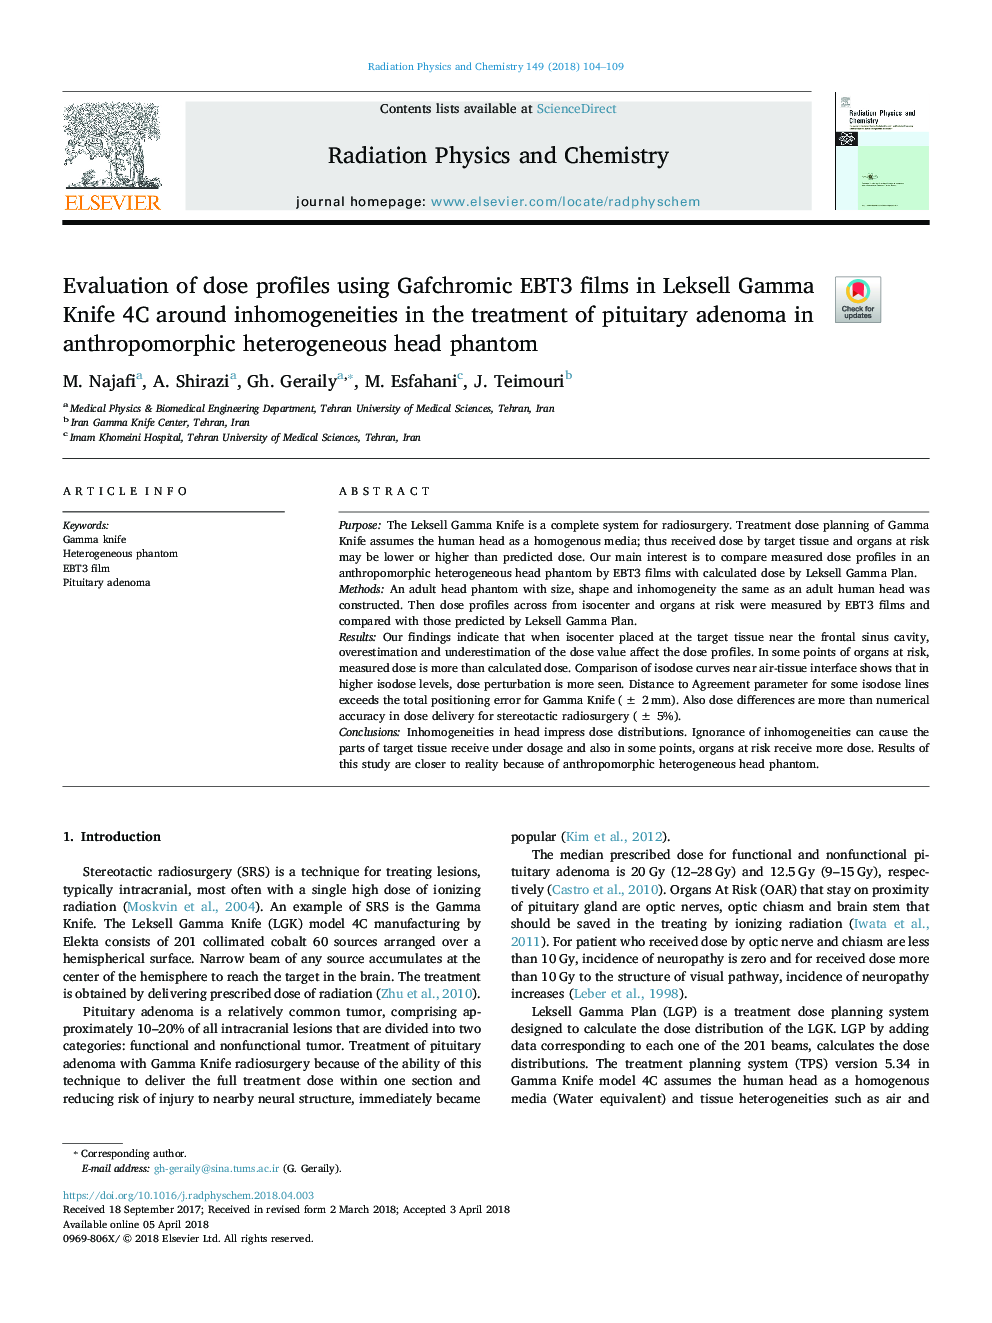 Evaluation of dose profiles using Gafchromic EBT3 films in Leksell Gamma Knife 4C around inhomogeneities in the treatment of pituitary adenoma in anthropomorphic heterogeneous head phantom